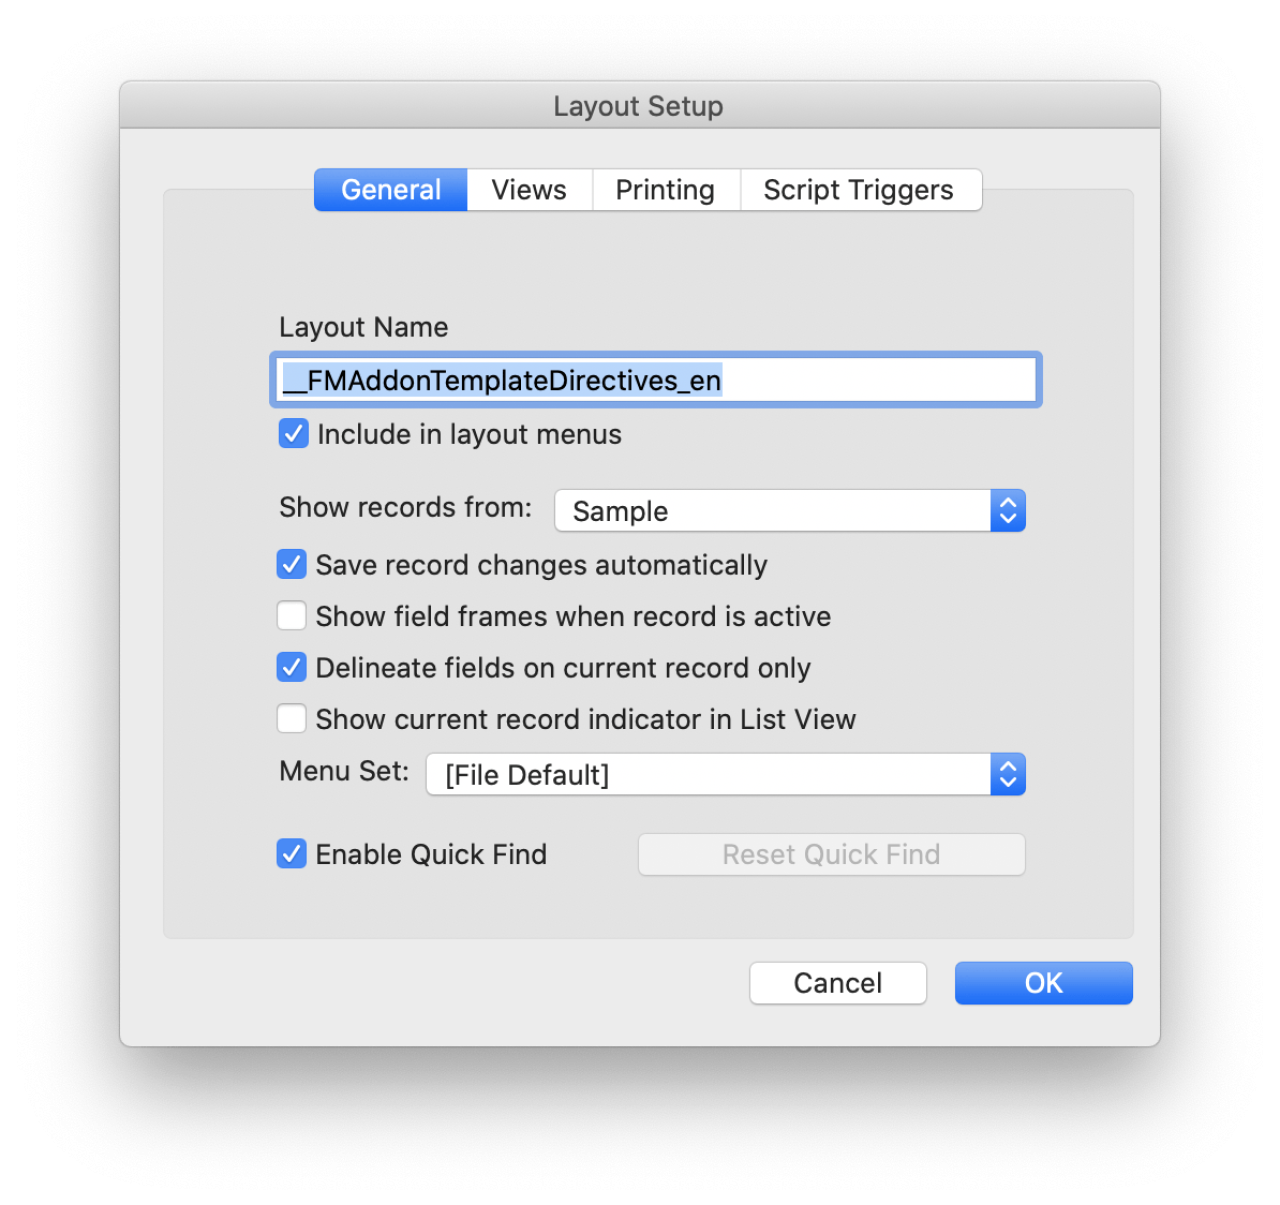 filemaker add on template directives layout setup.